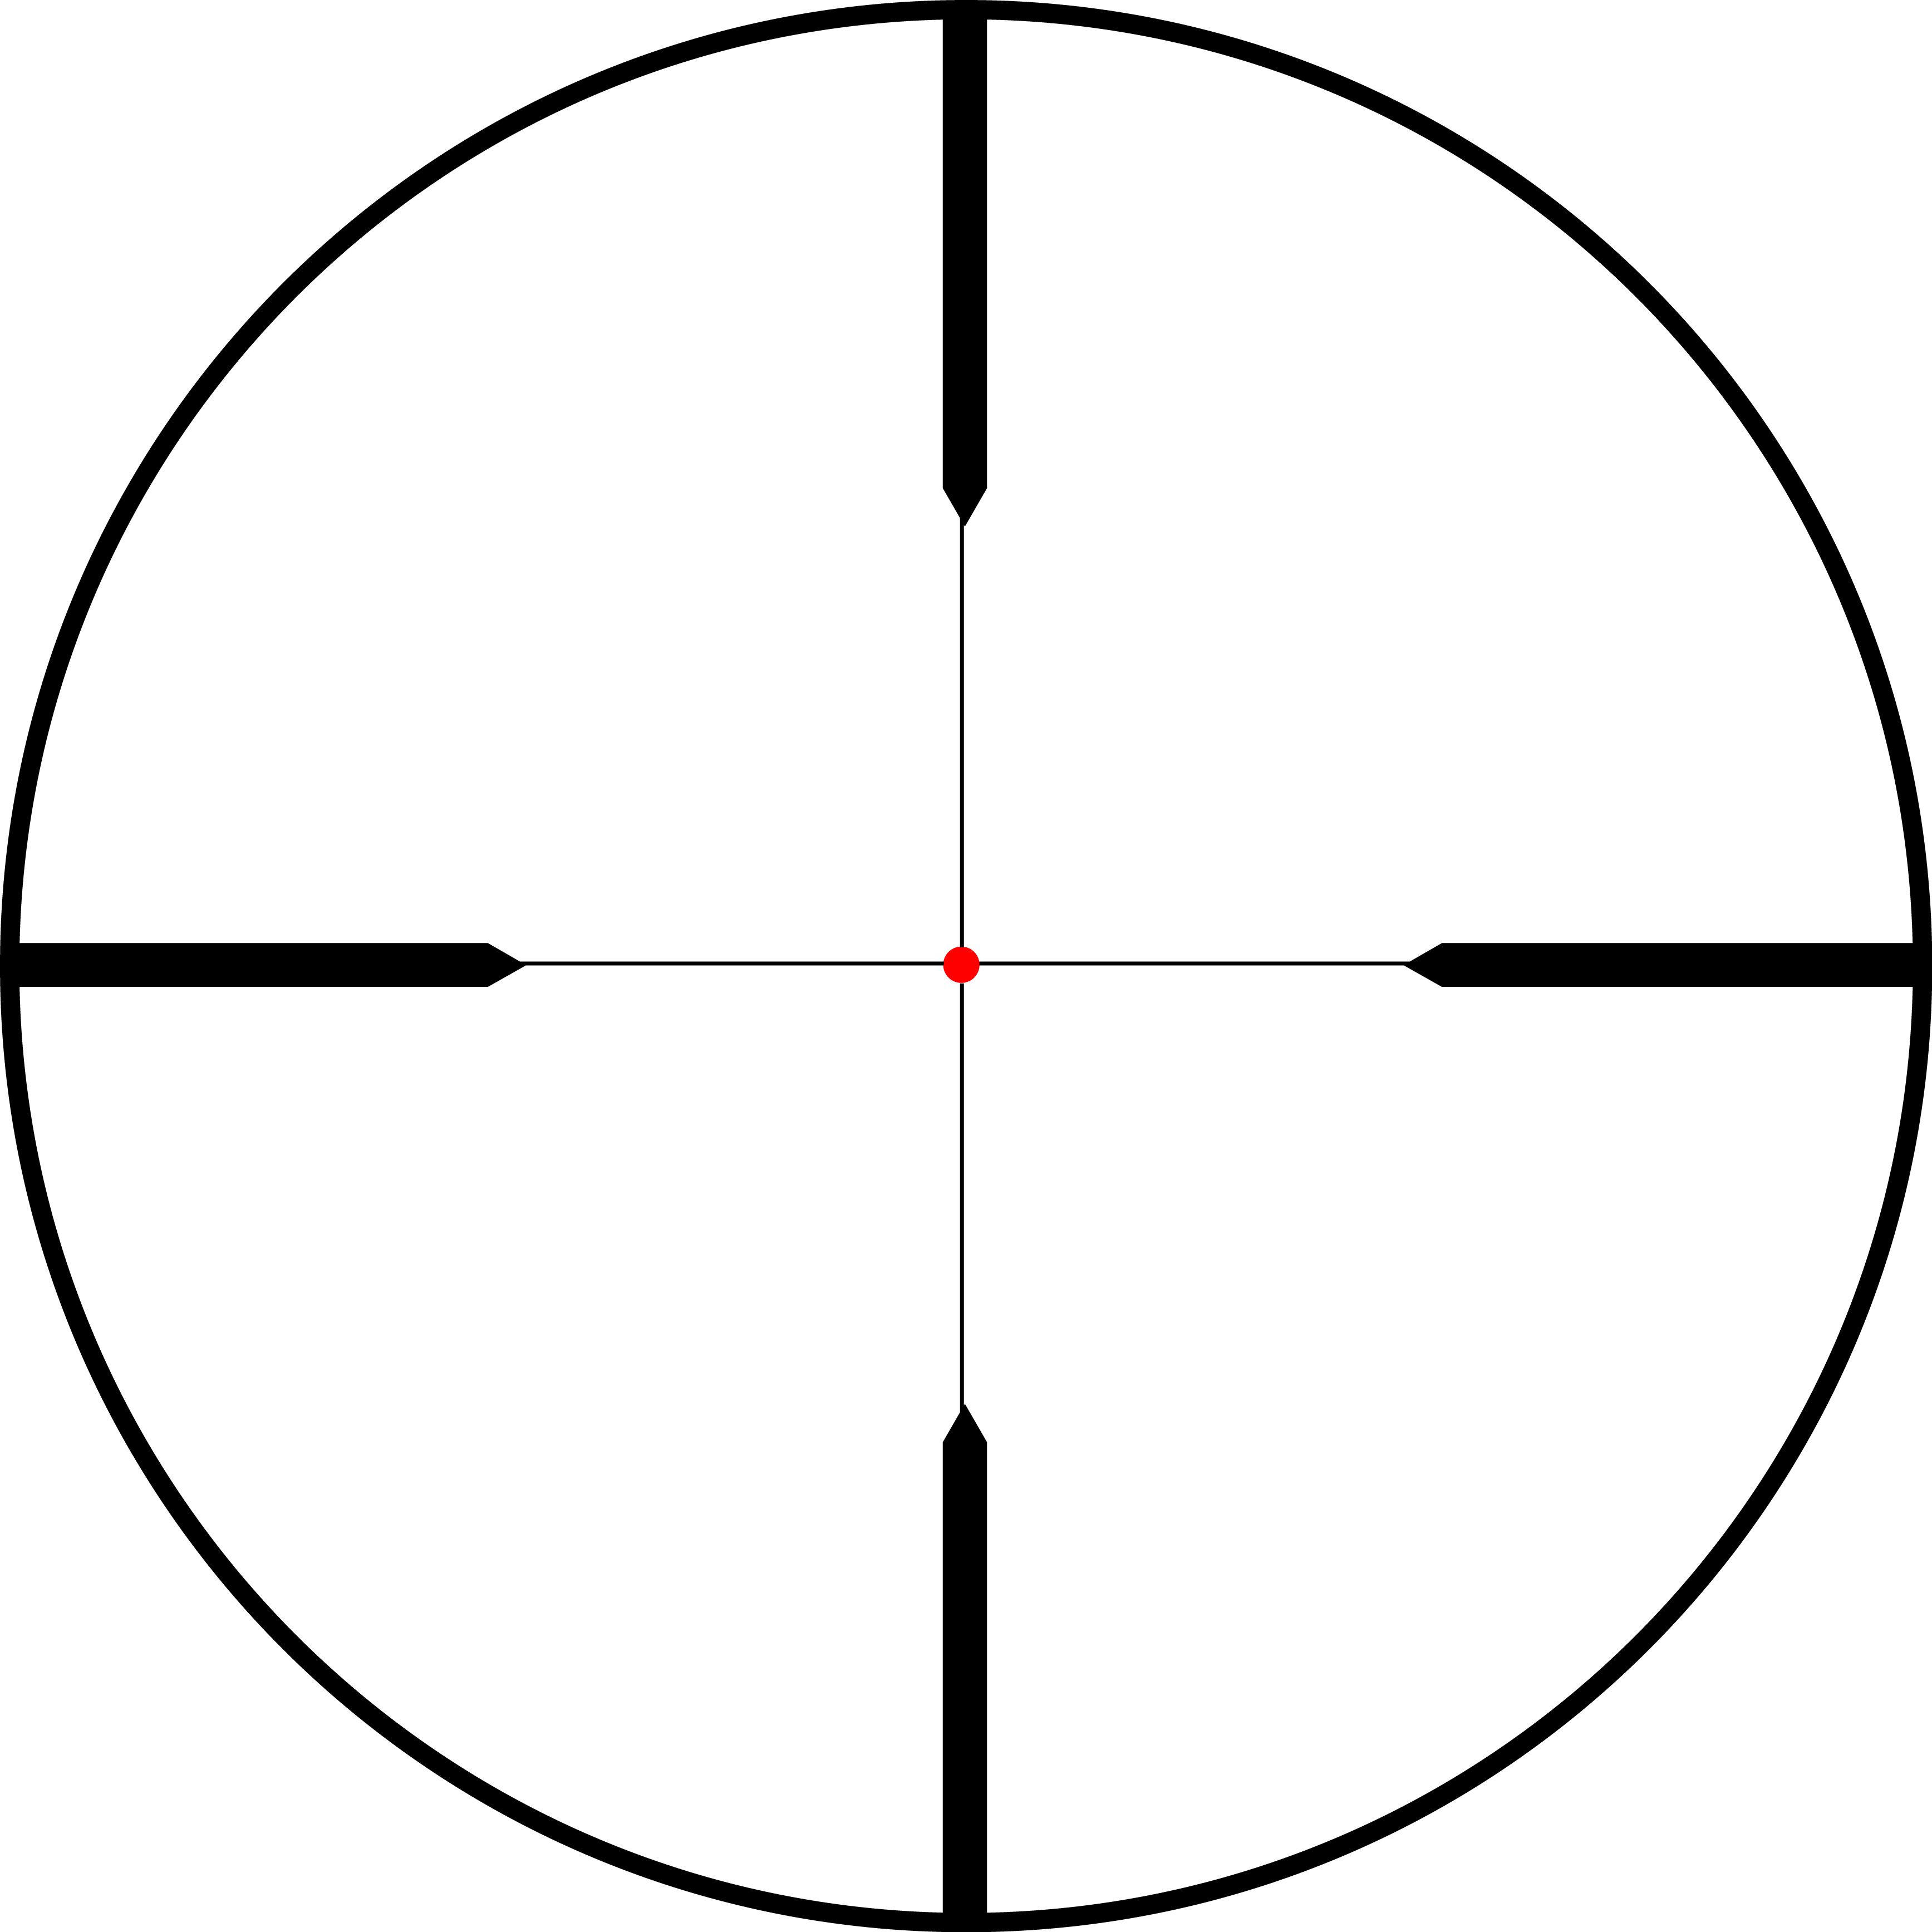 Rifle Scope Crosshairs Png - ClipArt Best